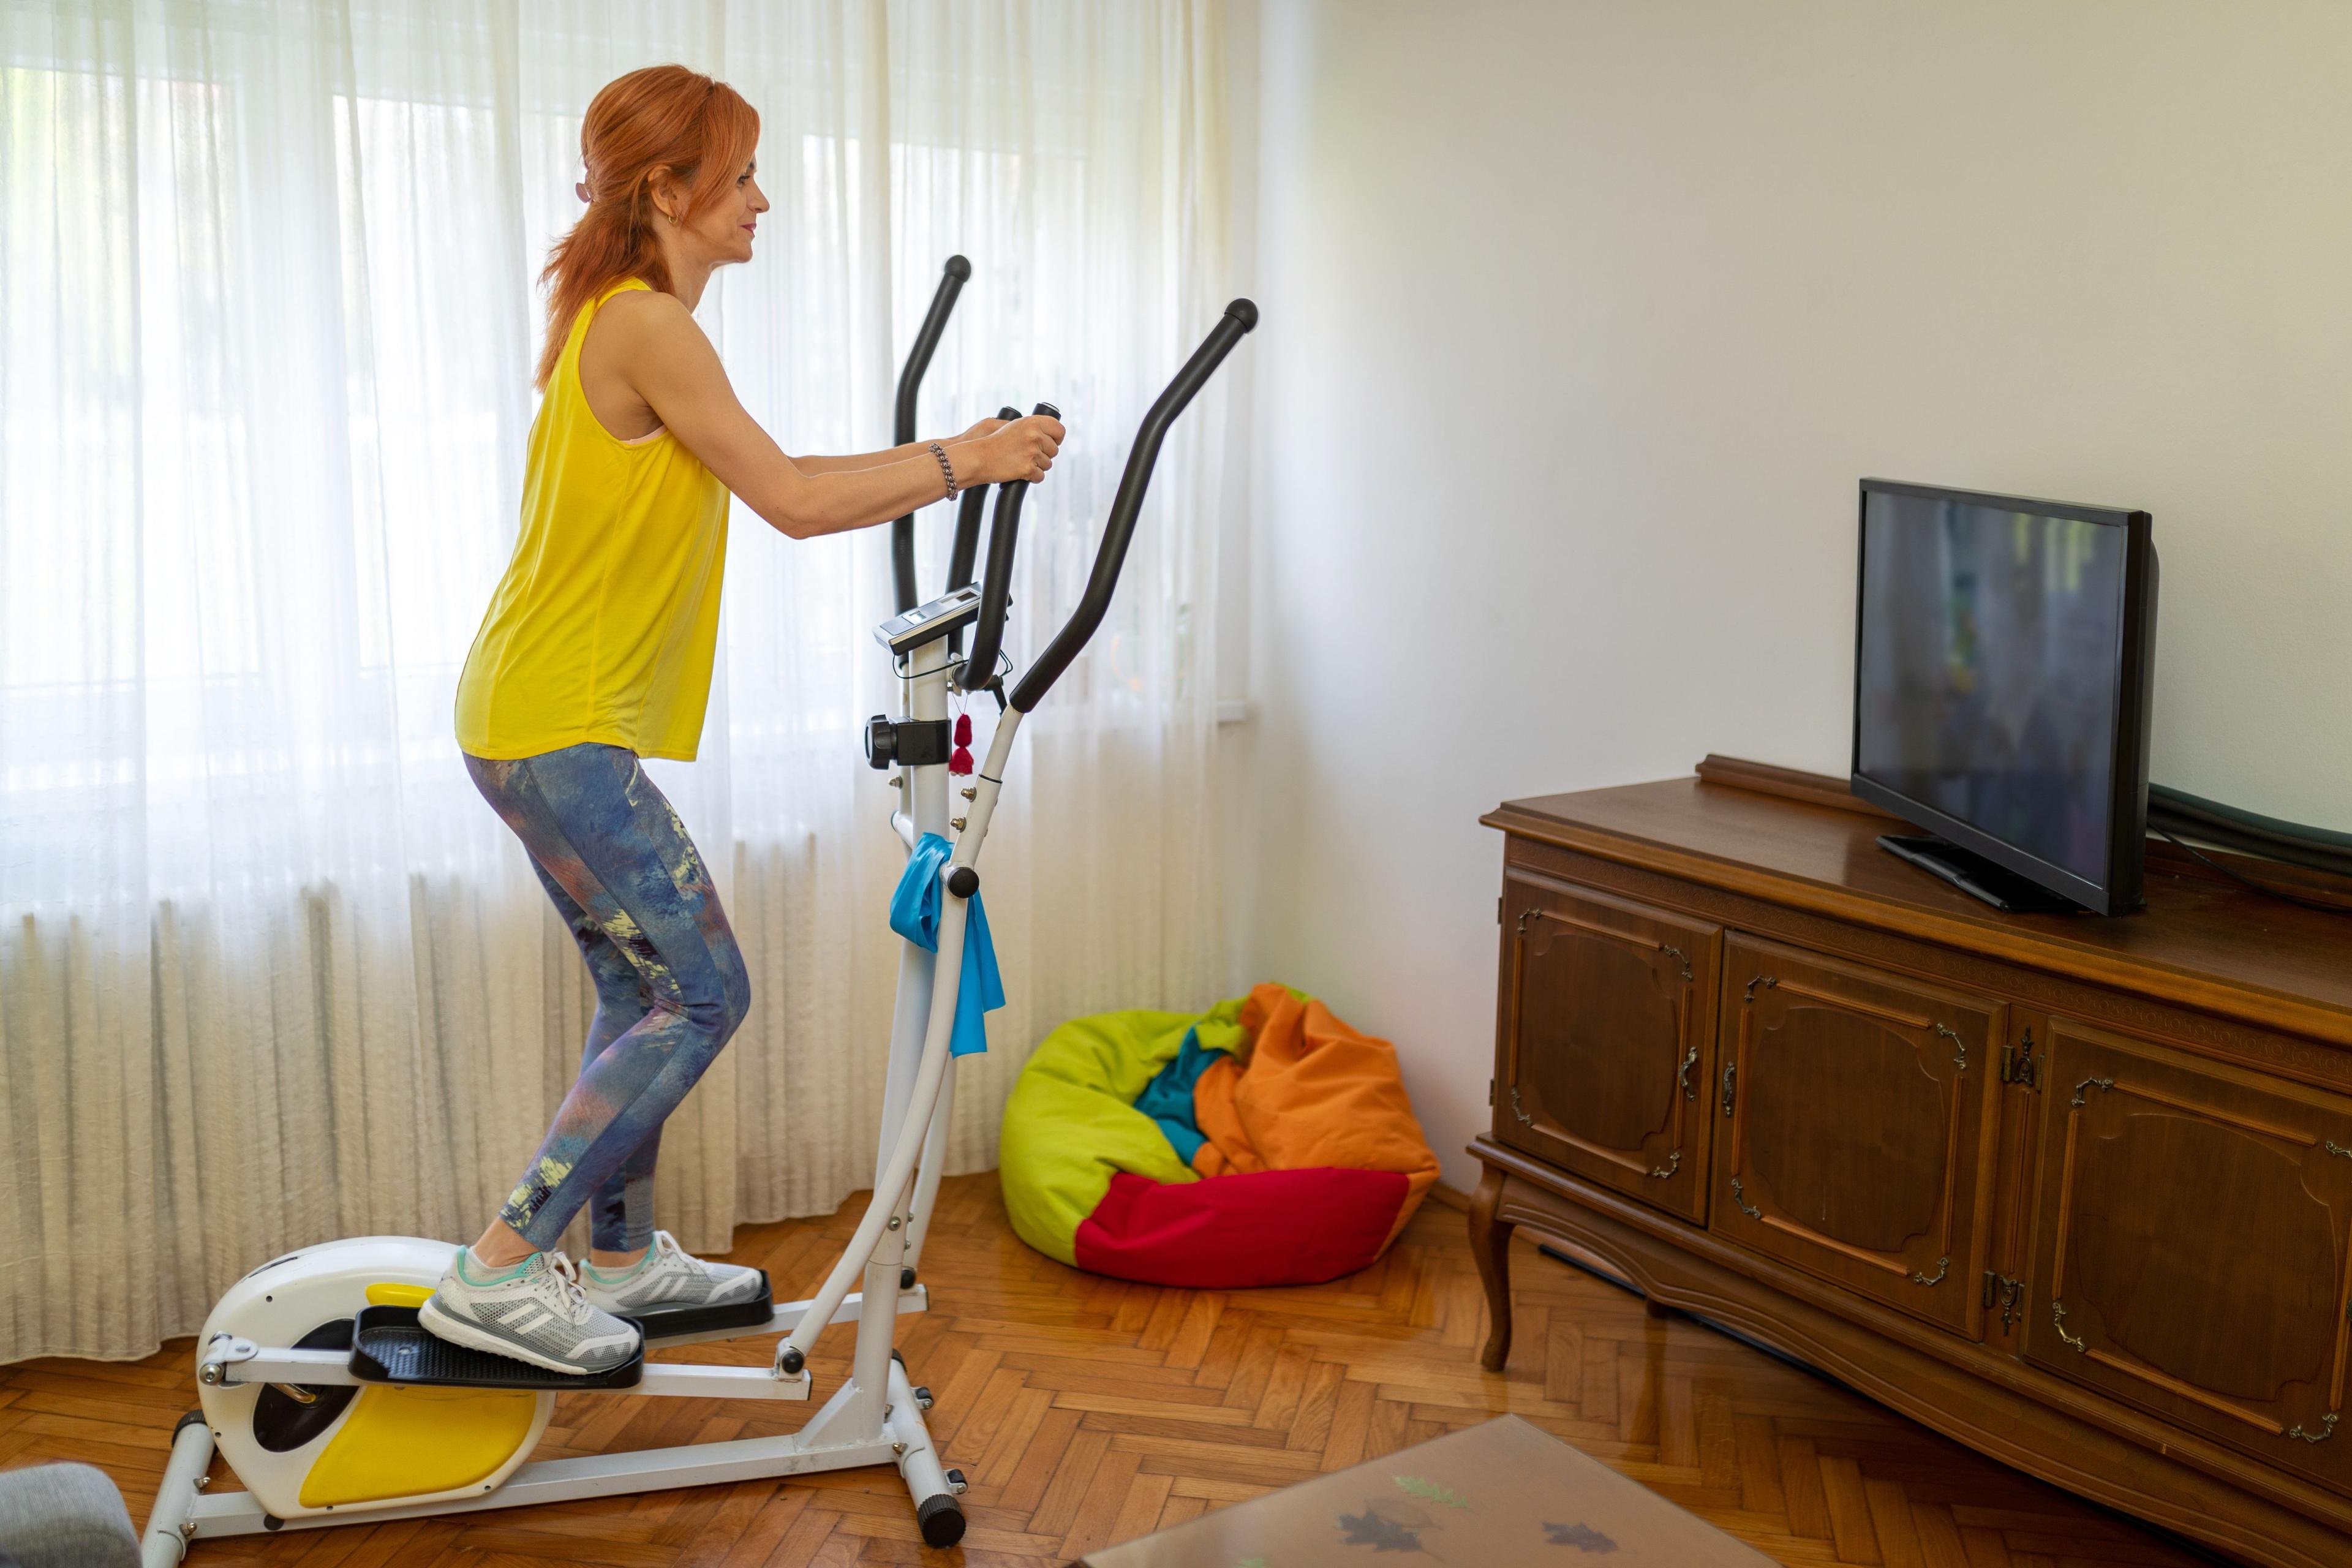 How do you exercise while watching television?